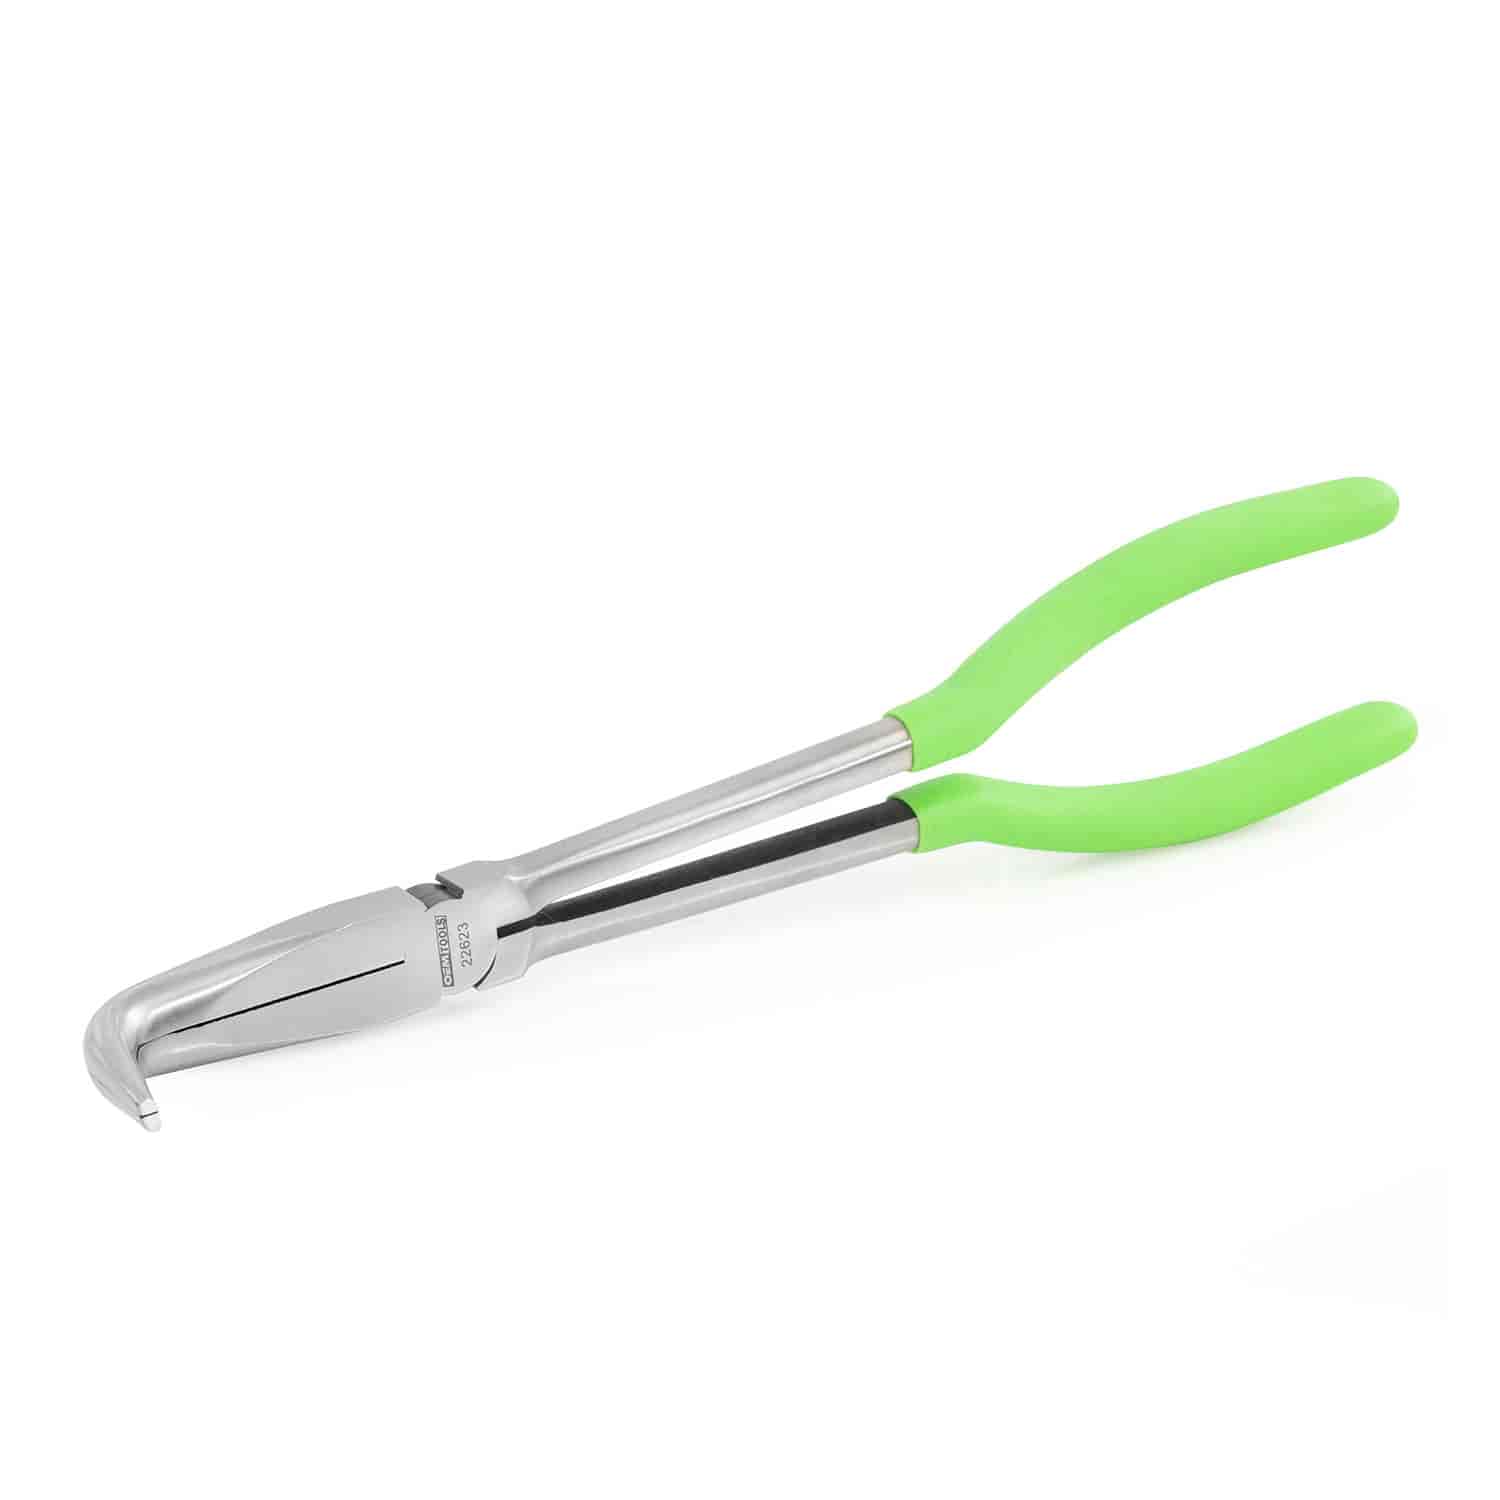 90-Degree Long Nose Pliers, 11 in. Length